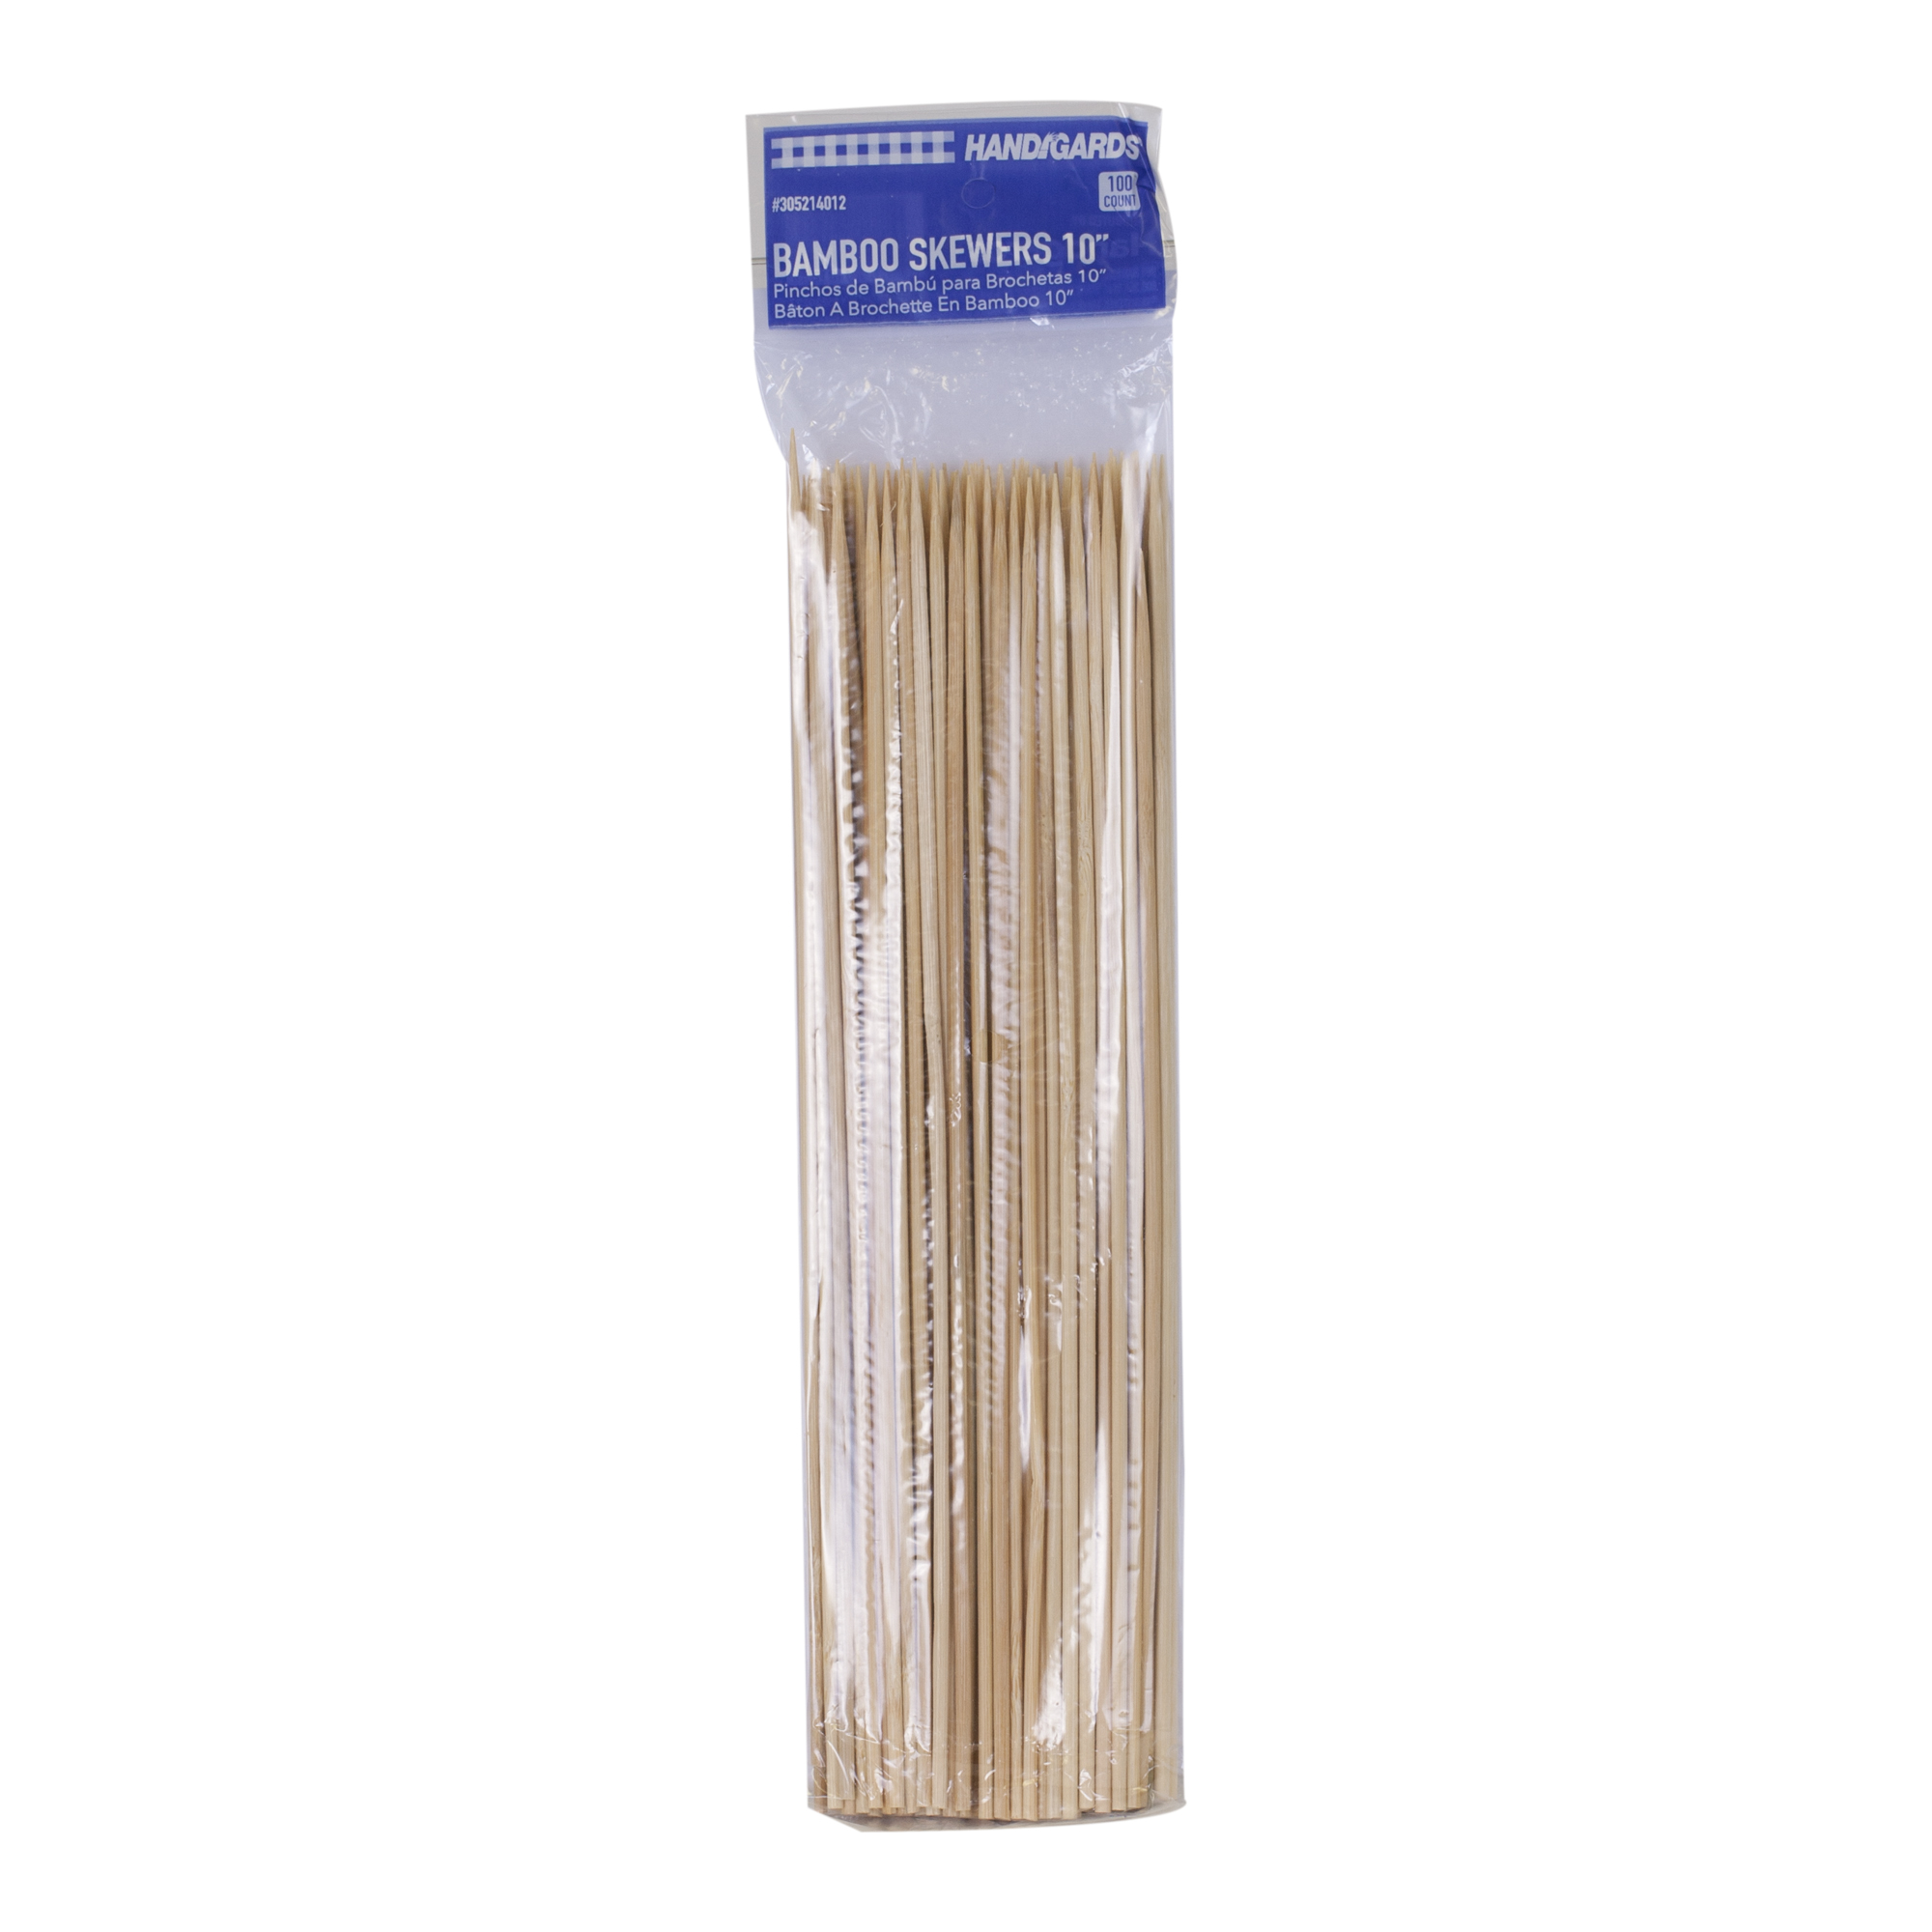 Napoleon 12-Inch Bamboo Skewers - 30-Pack - 70115